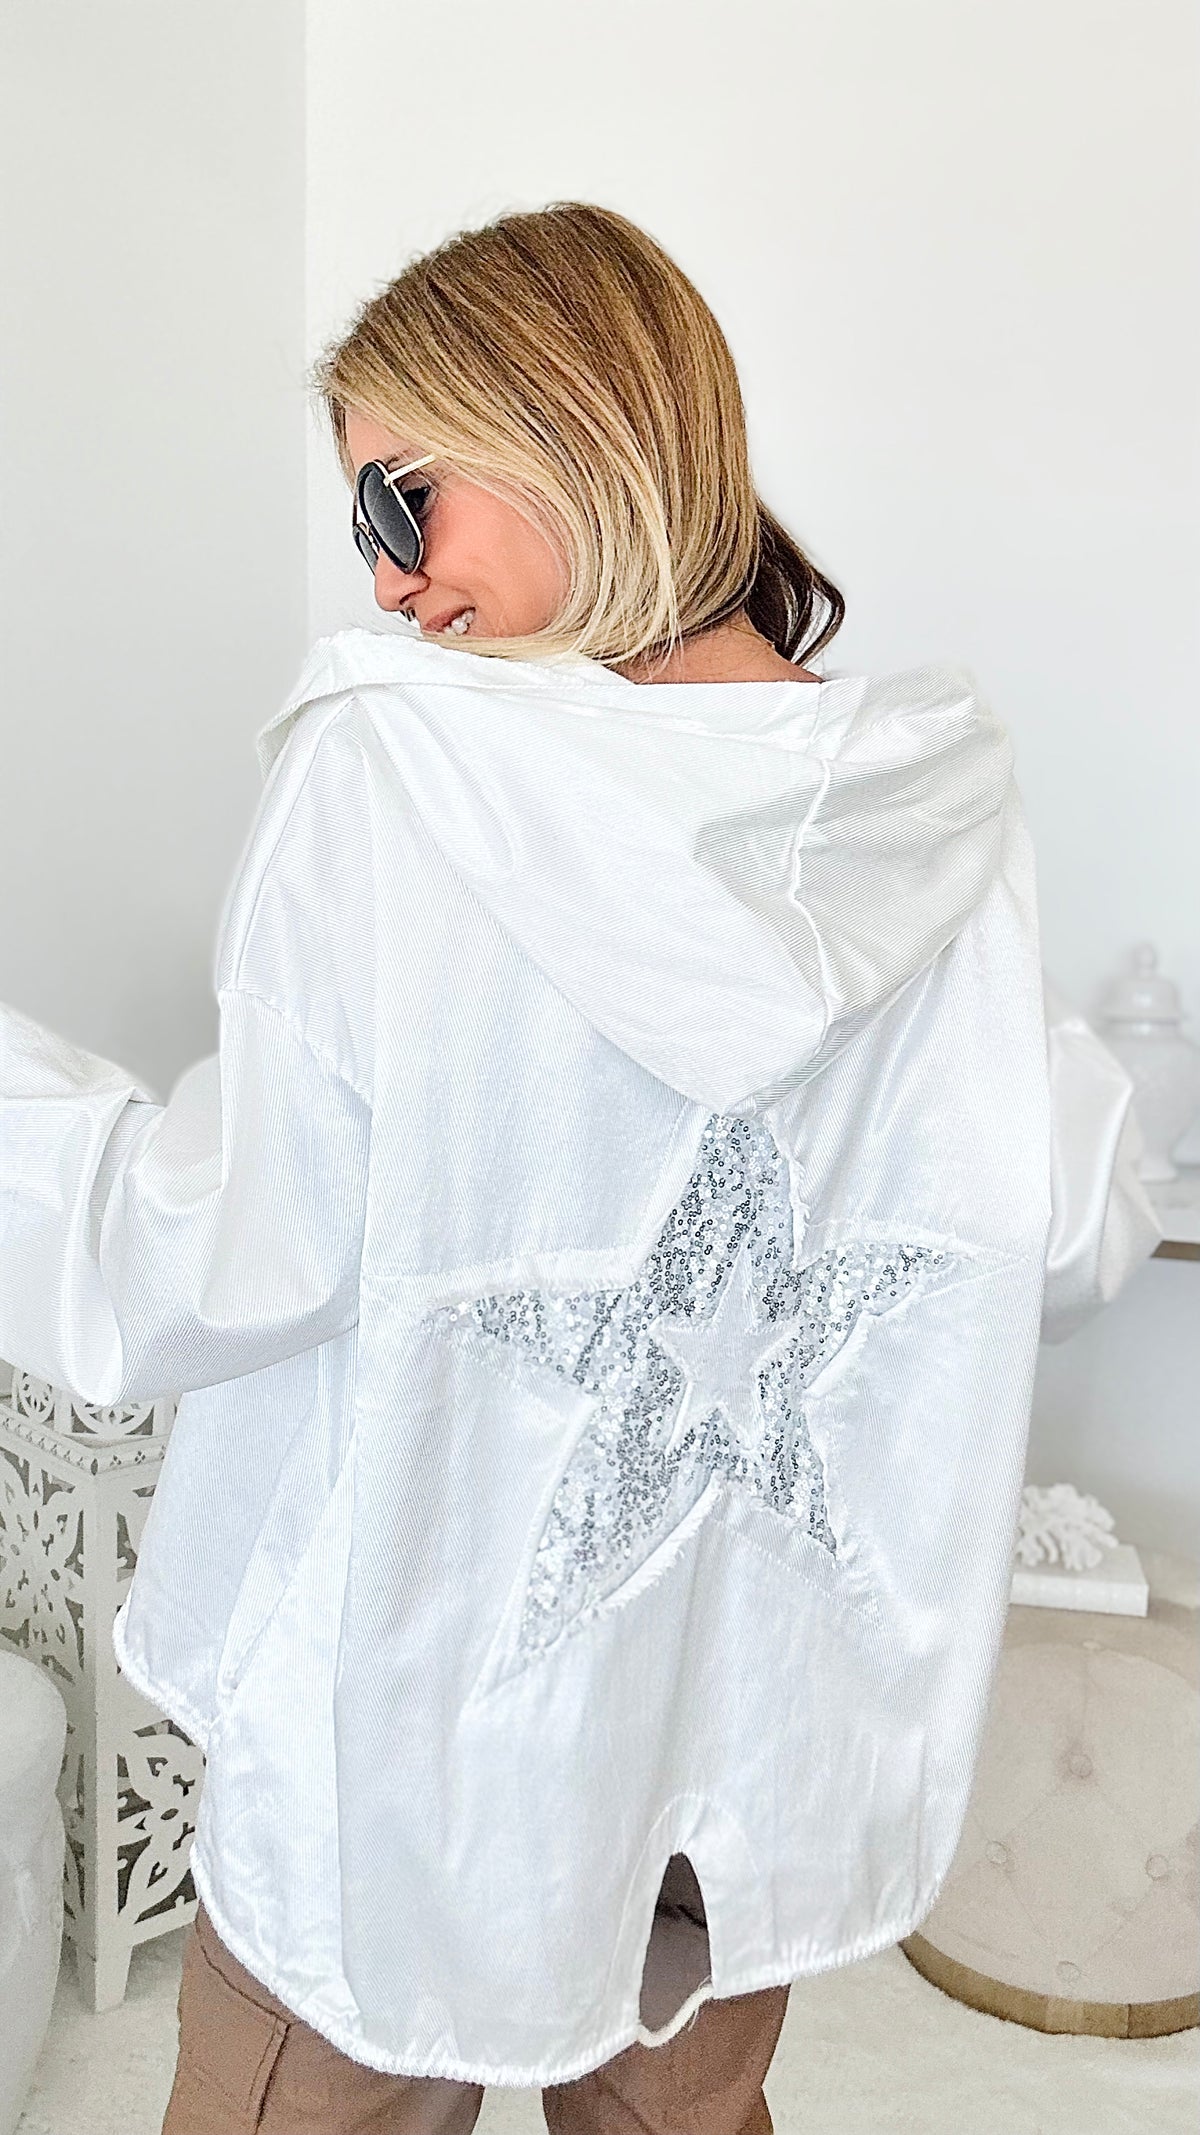 Shine Like A Star Italian Hoodie Cardigan - White-160 Jackets-Venti6-Coastal Bloom Boutique, find the trendiest versions of the popular styles and looks Located in Indialantic, FL